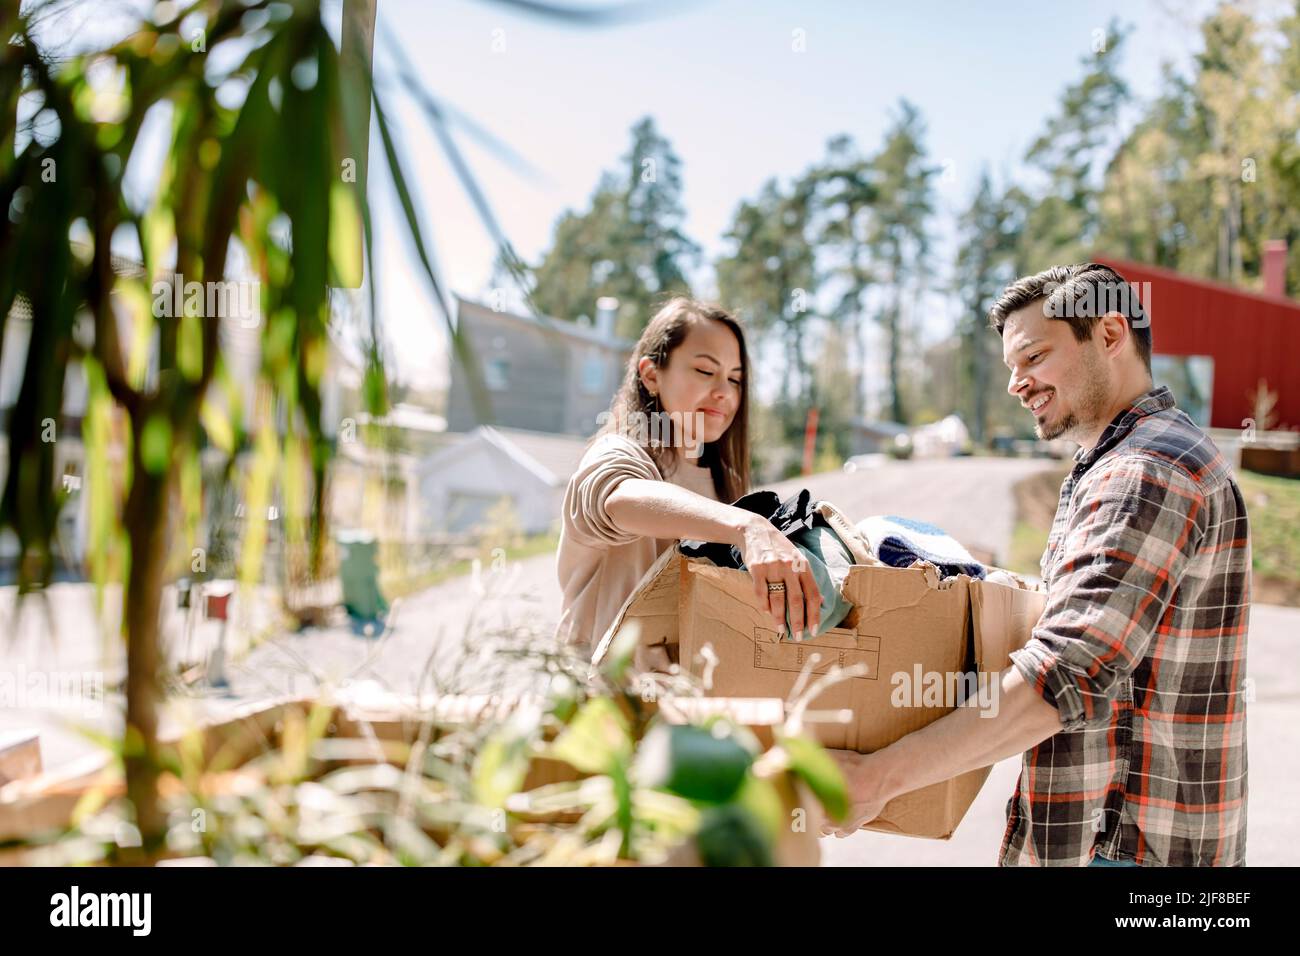 Couple carrying cardboard box during sunny day Stock Photo